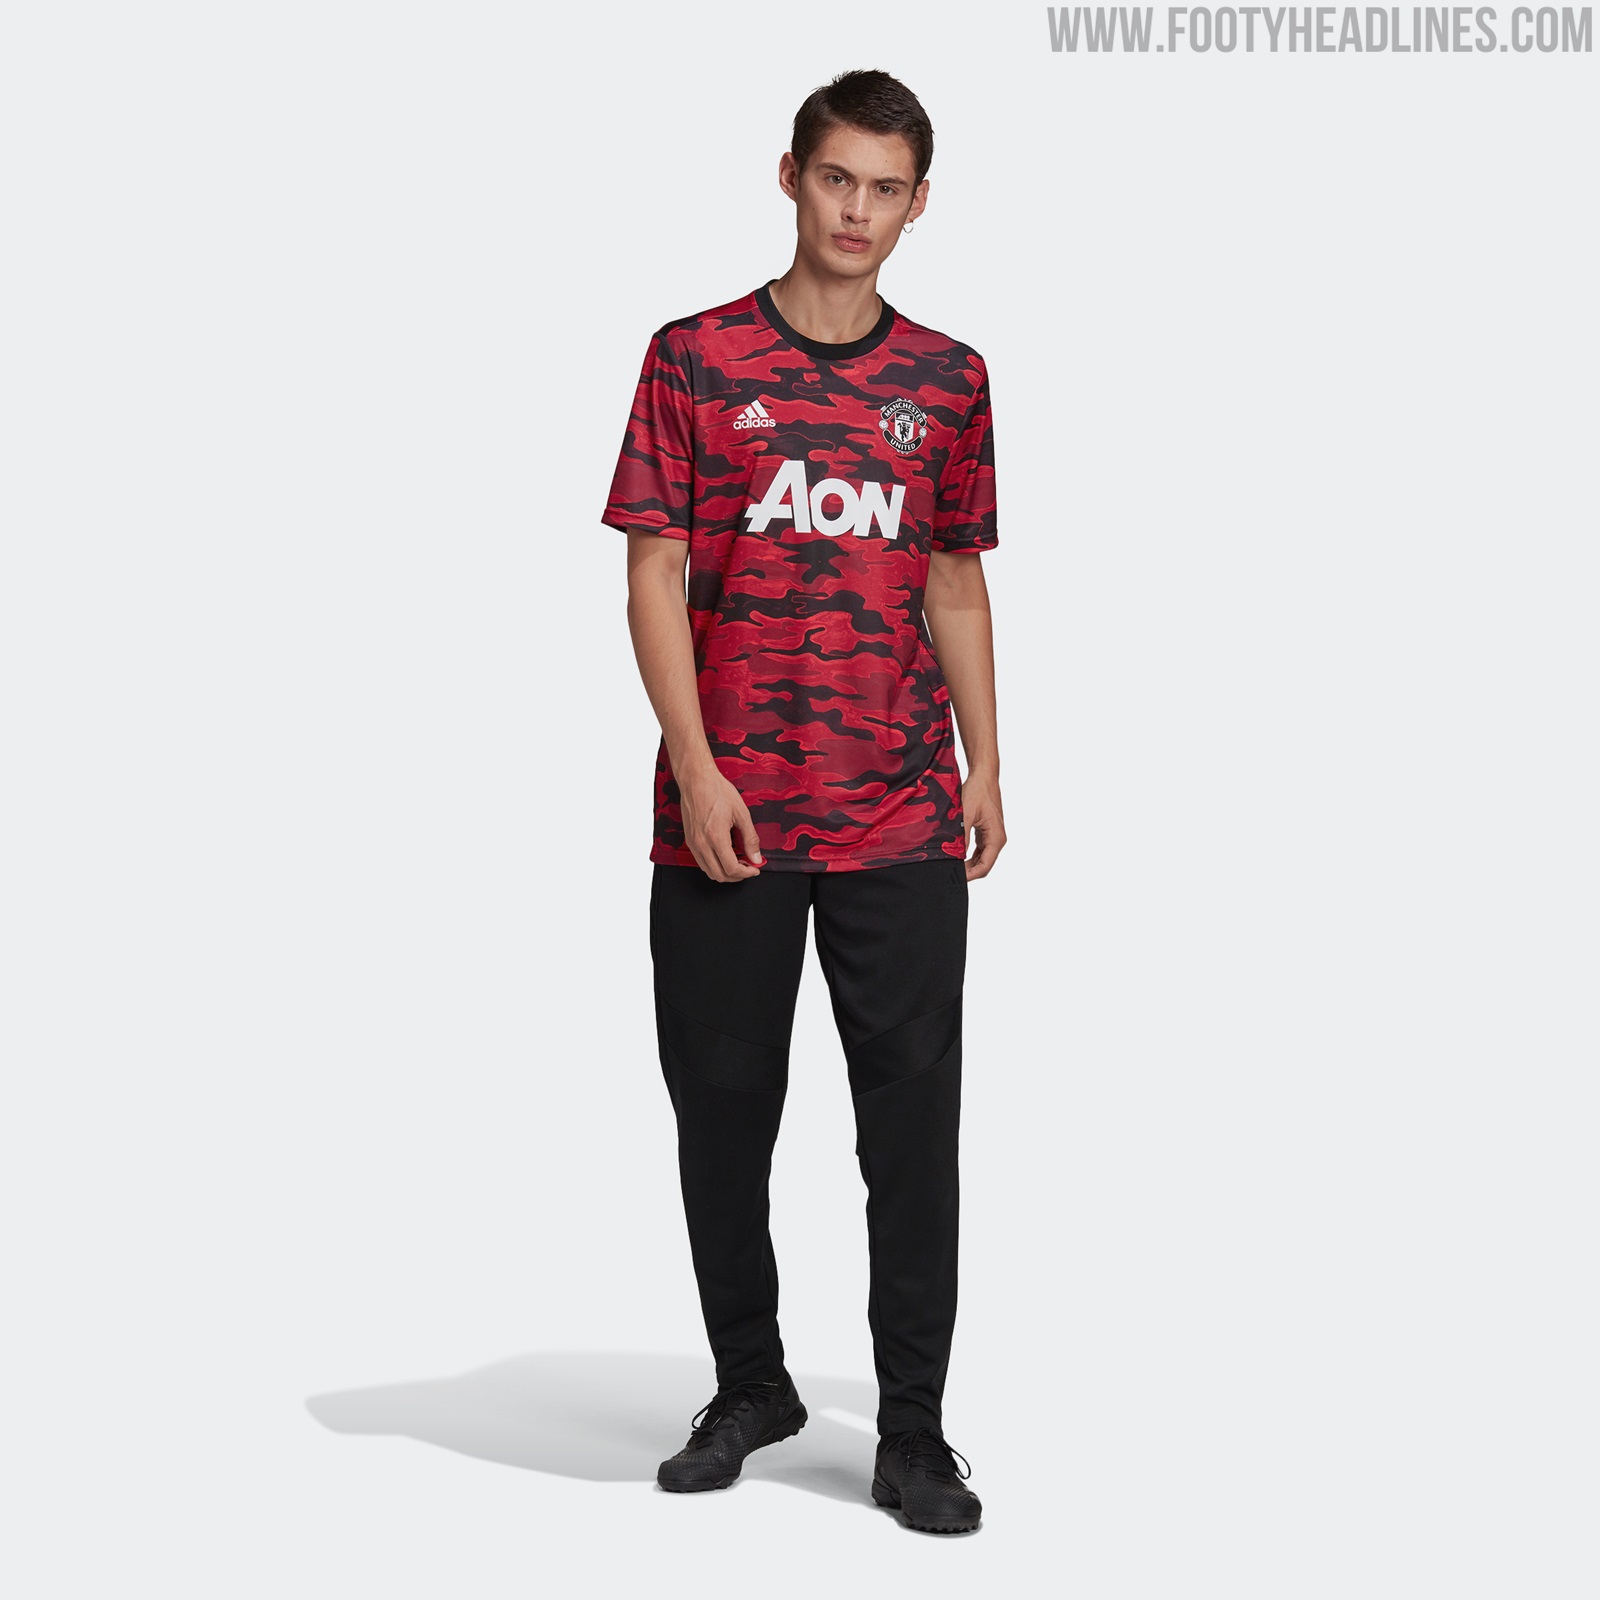 Manchester United 2021 Pre-Match Shirt Released - Footy Headlines